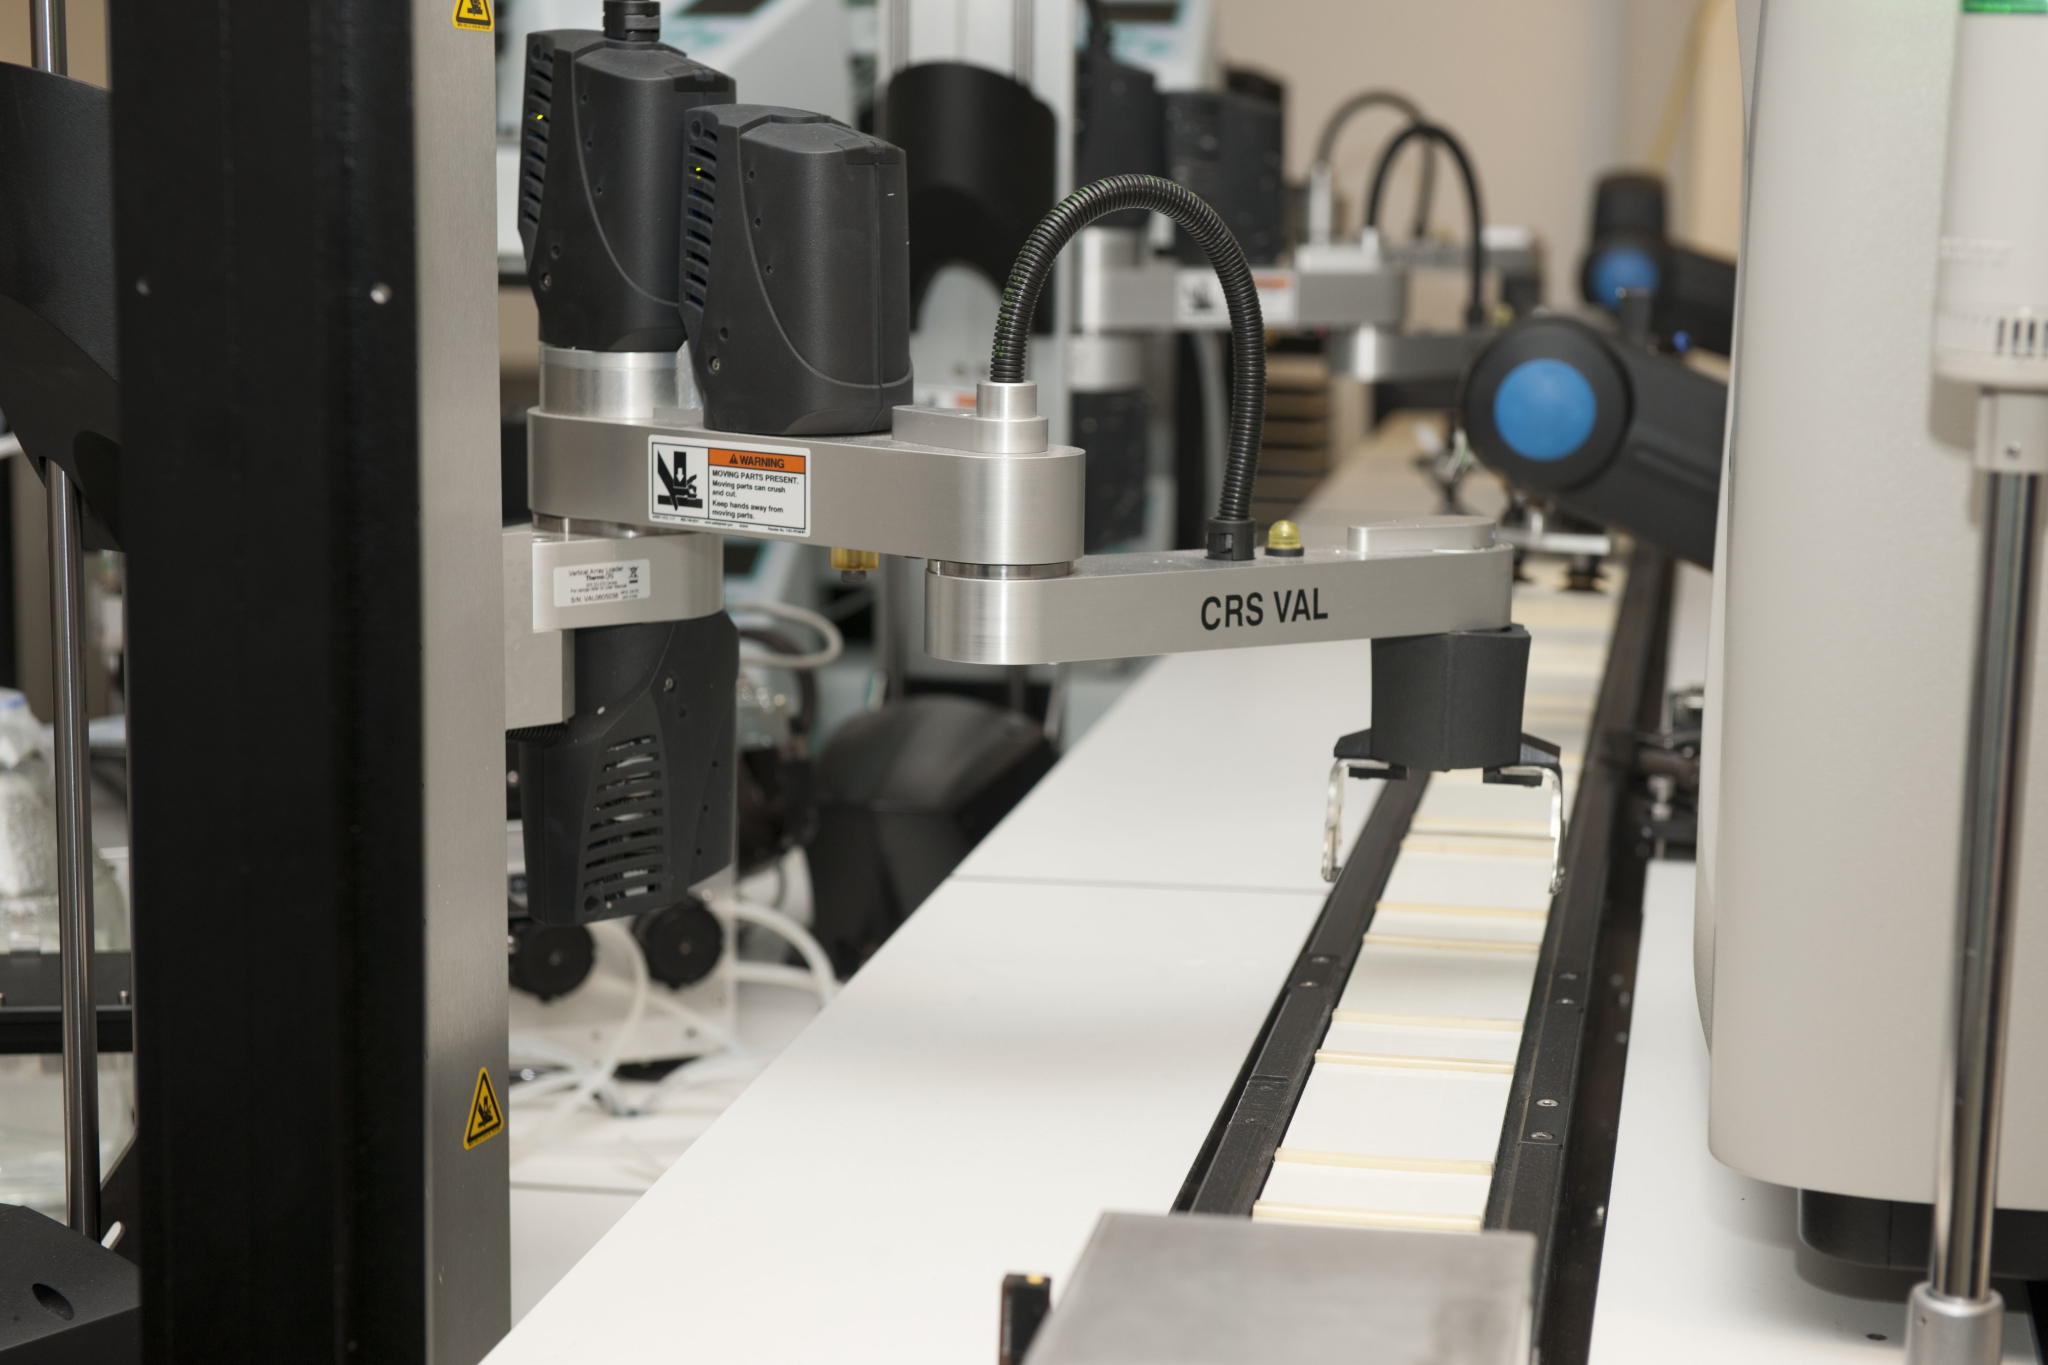 The compounds are tested in fully automated screening stations using high-throughput methods.